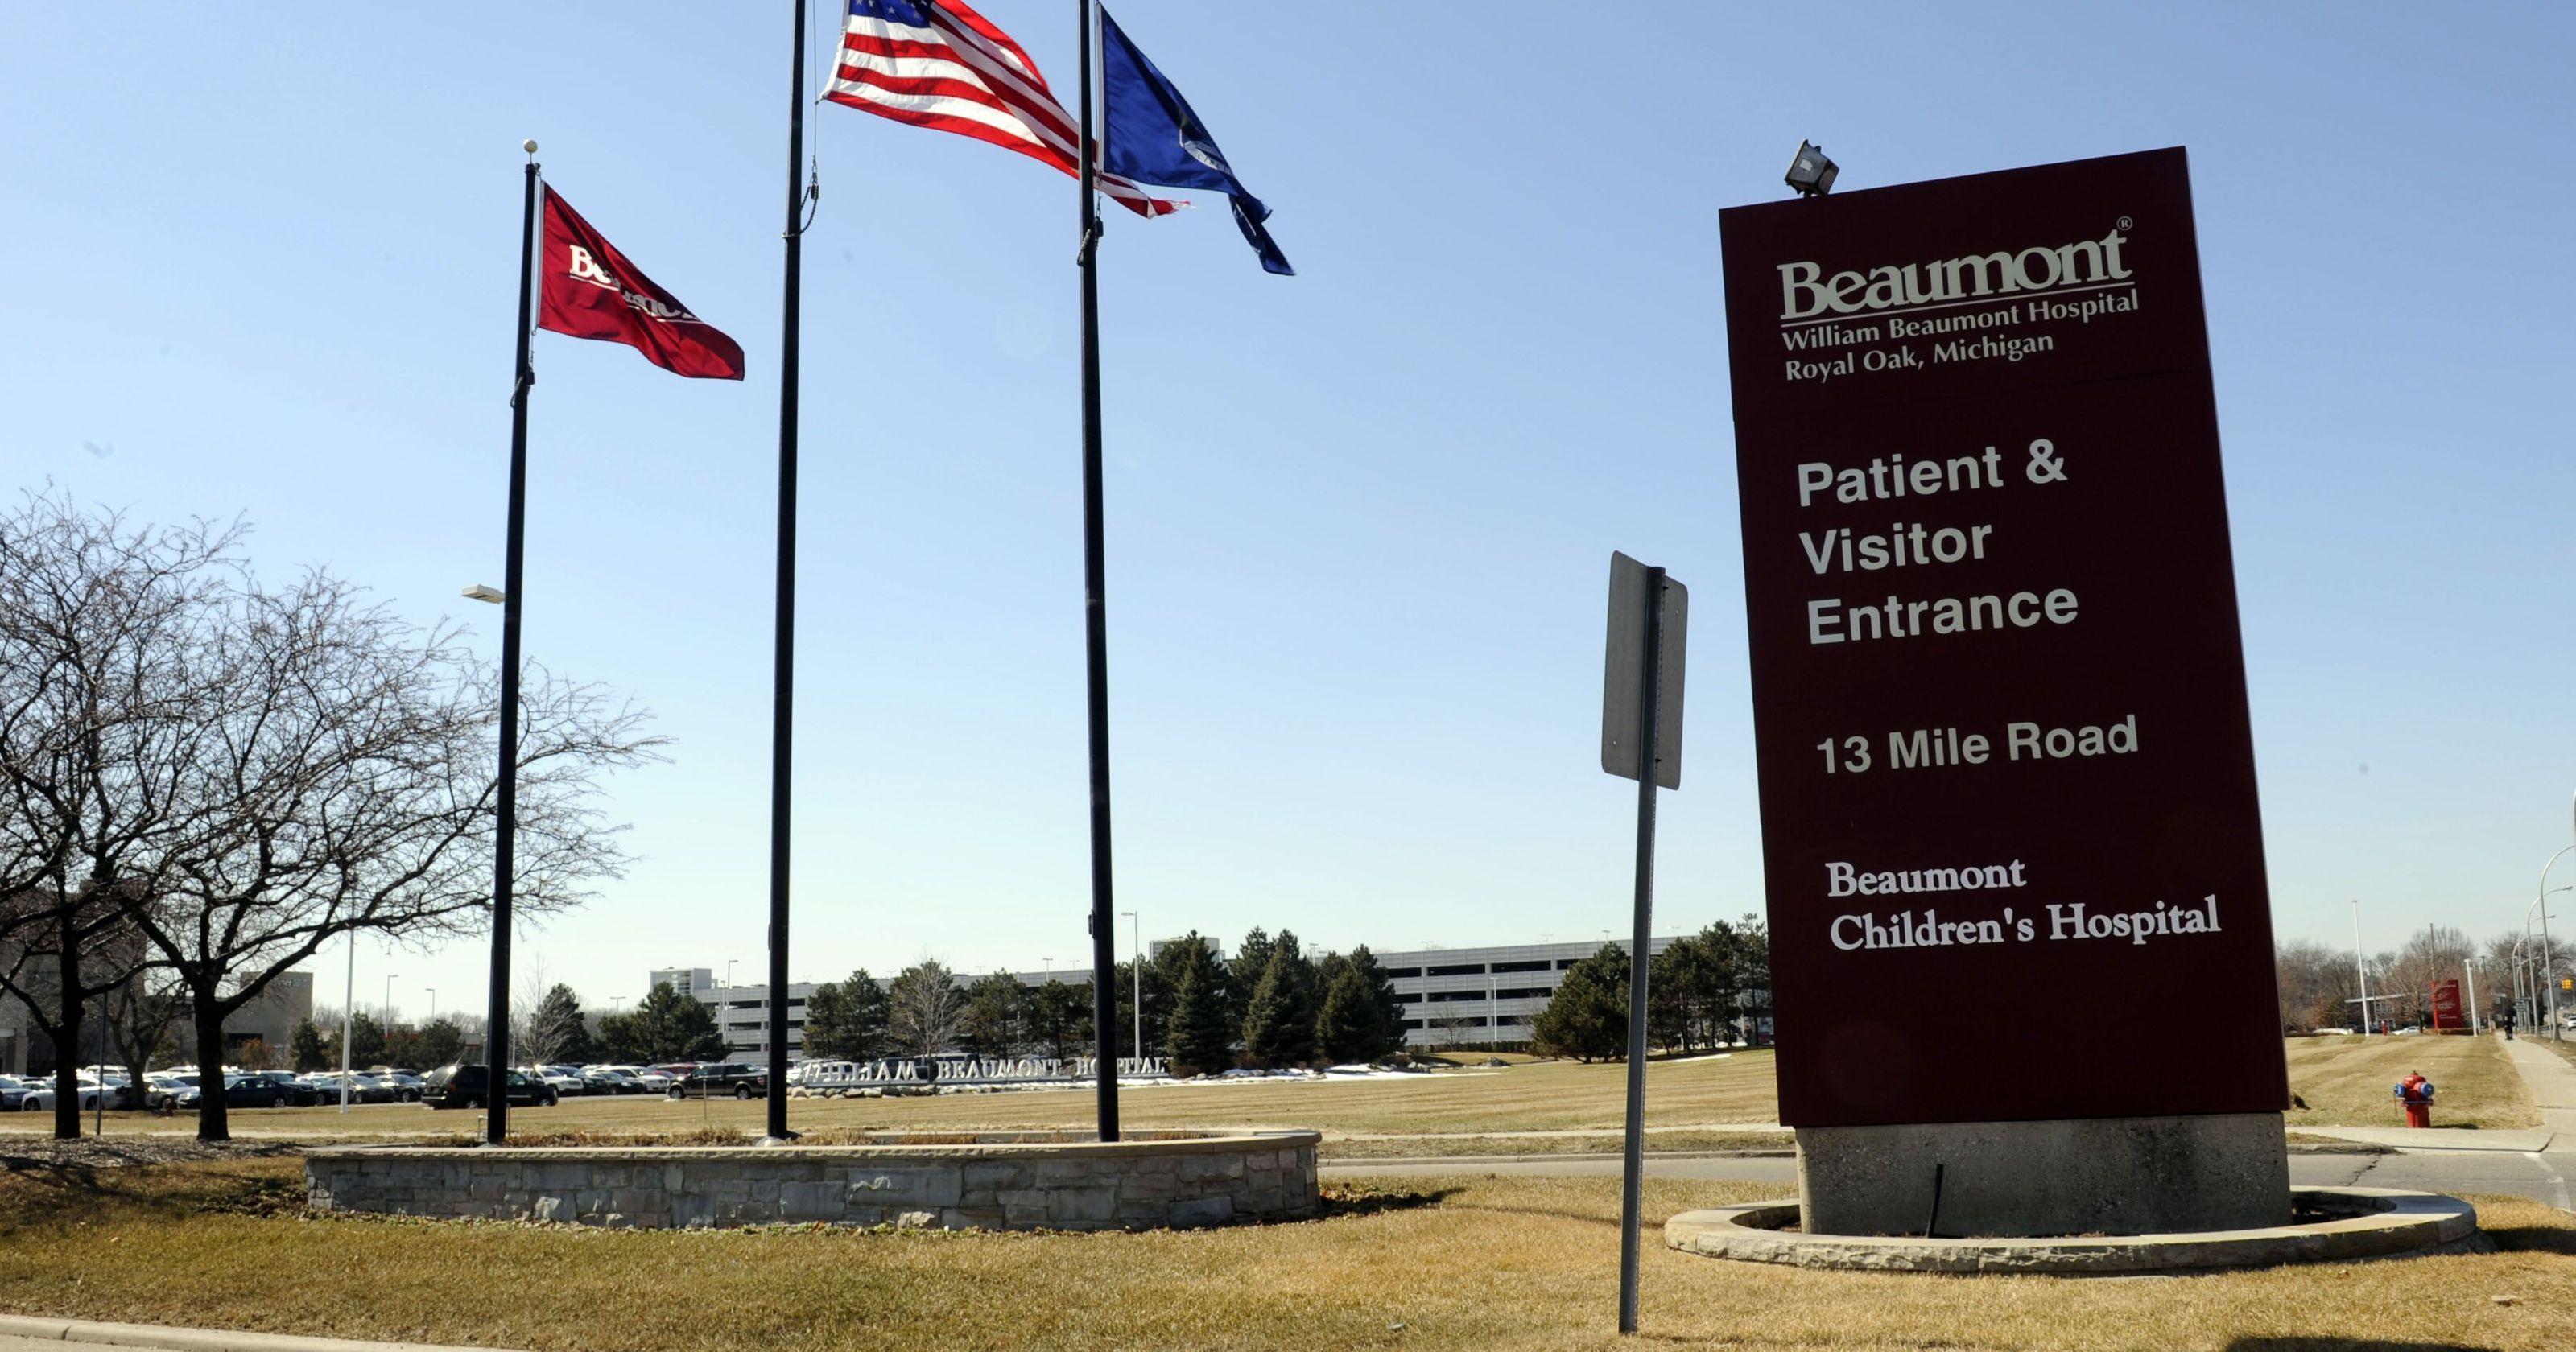 William Beaumont Health Logo - After merger, all hospitals get Beaumont name